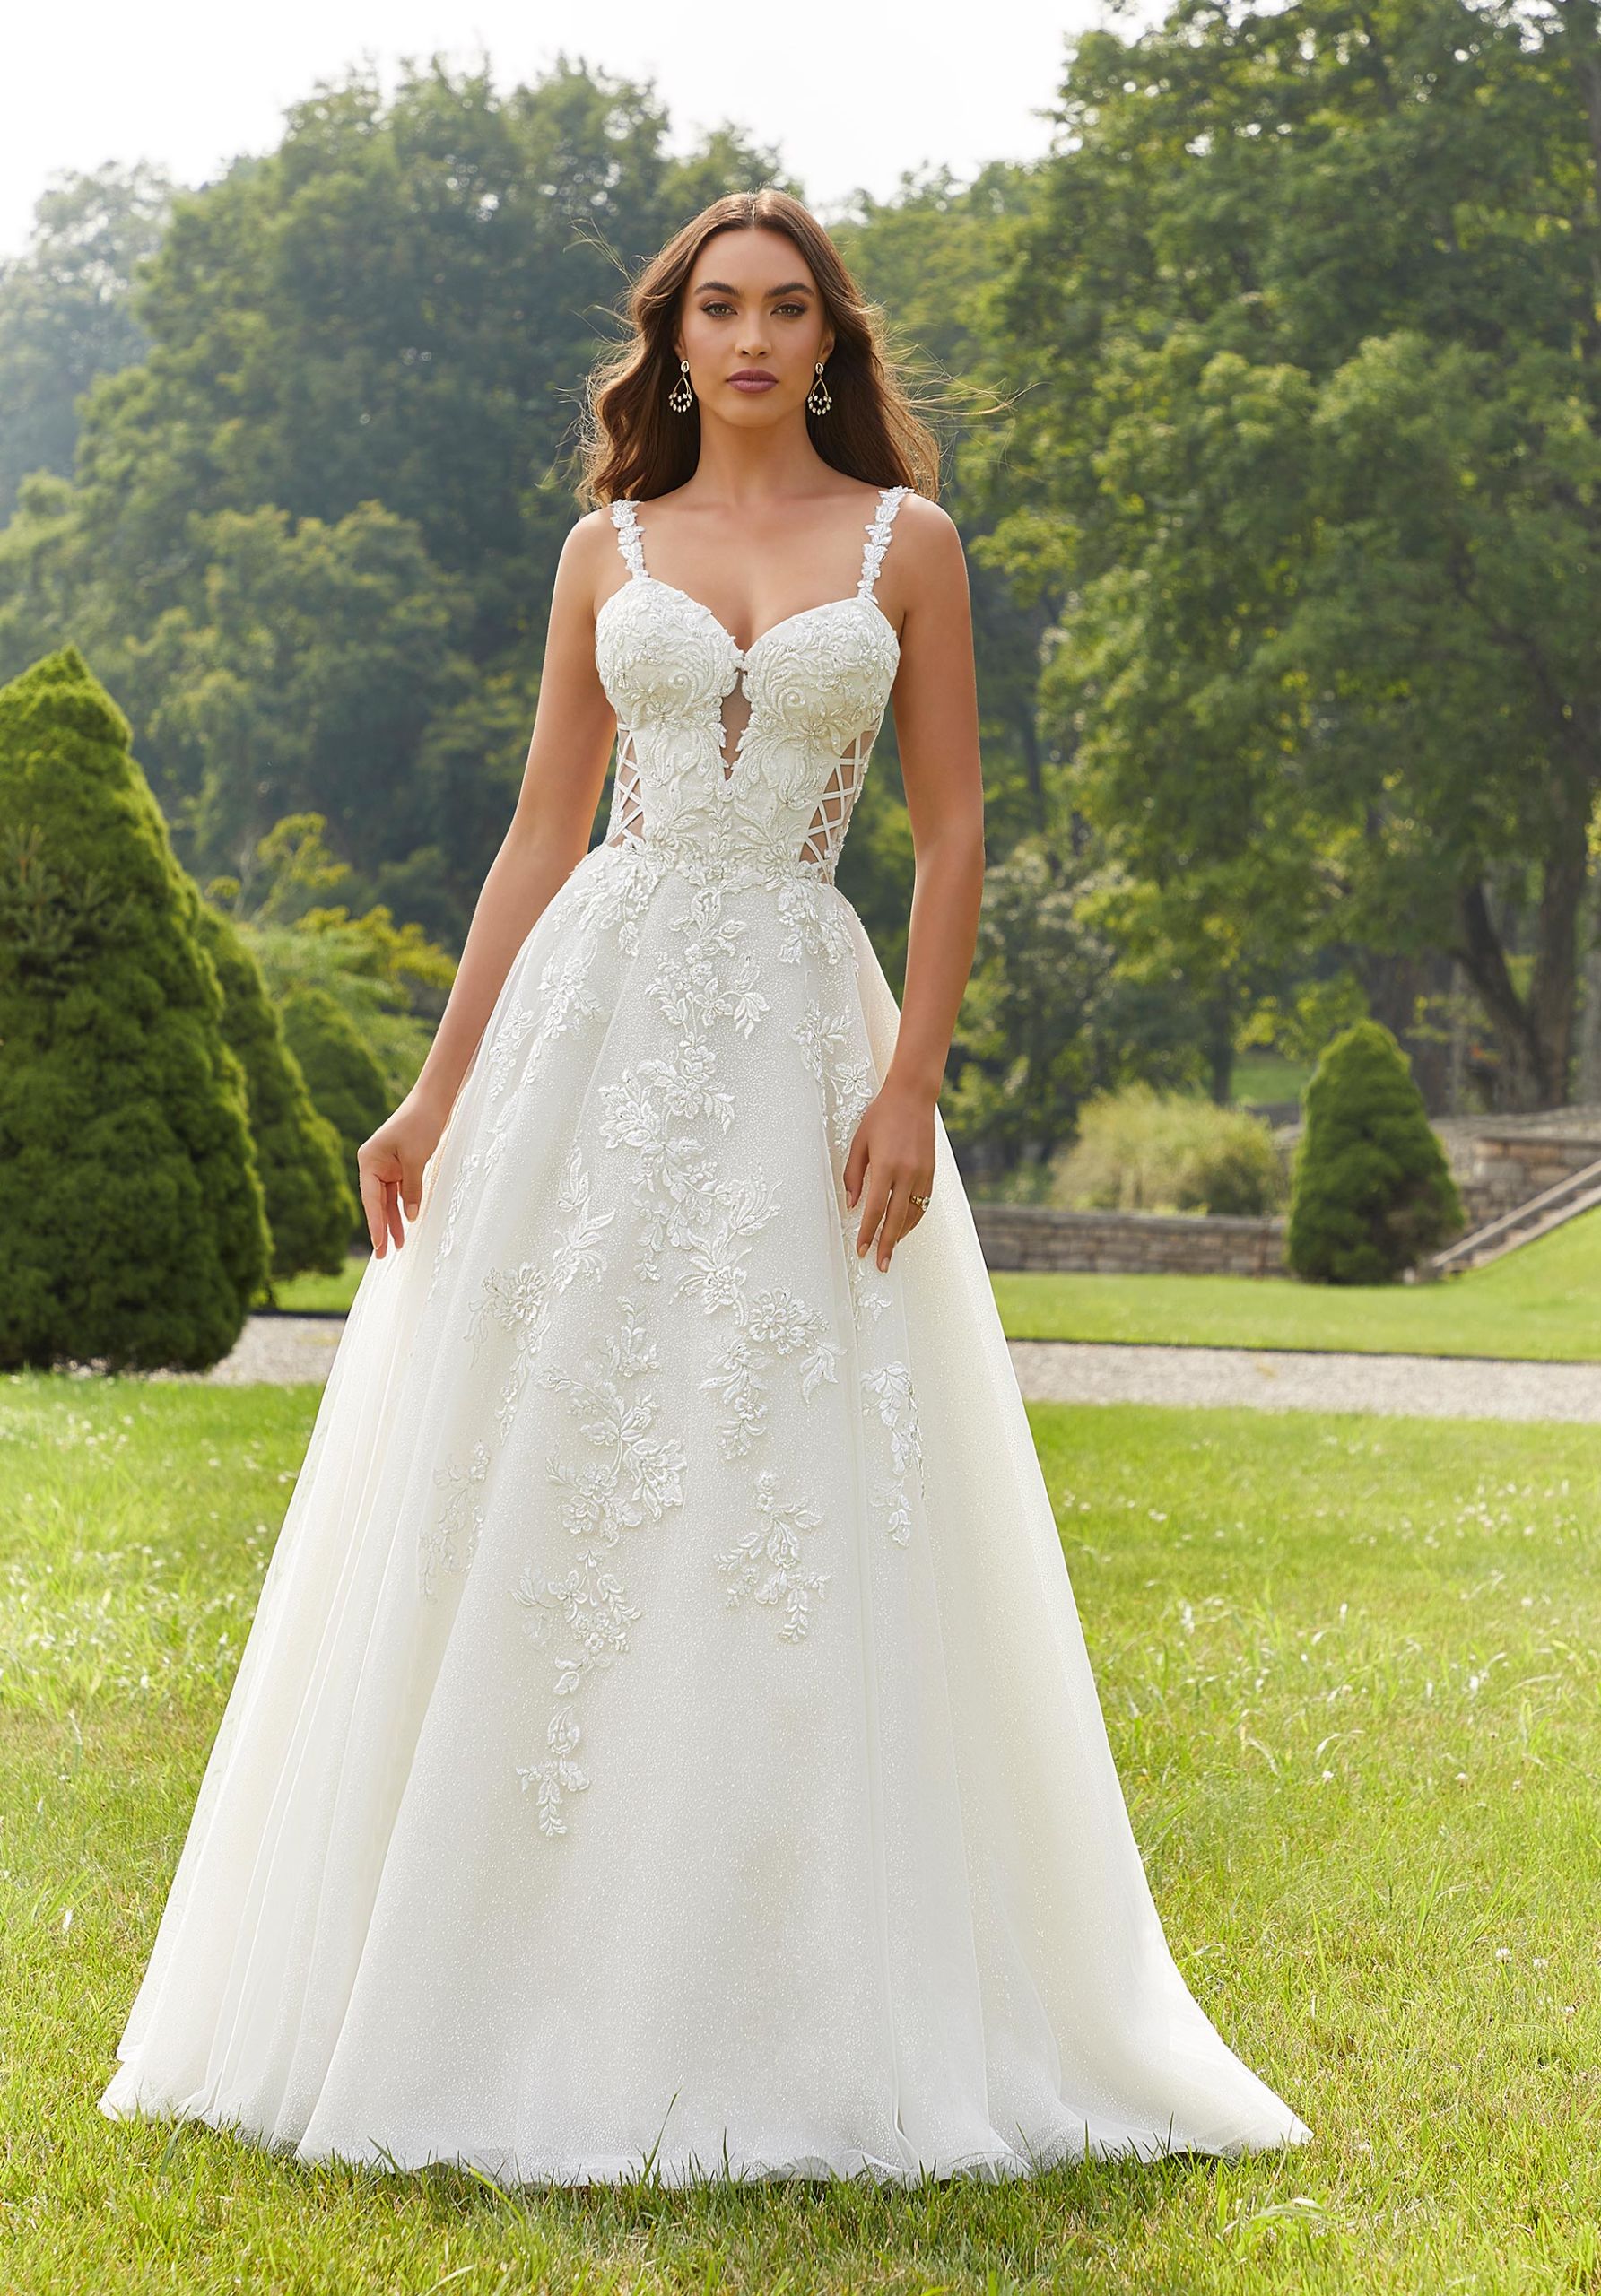 Bridal Gown Inventory at Catherine's. Start your online shopping experience here. Pin your favorite wedding dresses and then make an appointment to try them on!